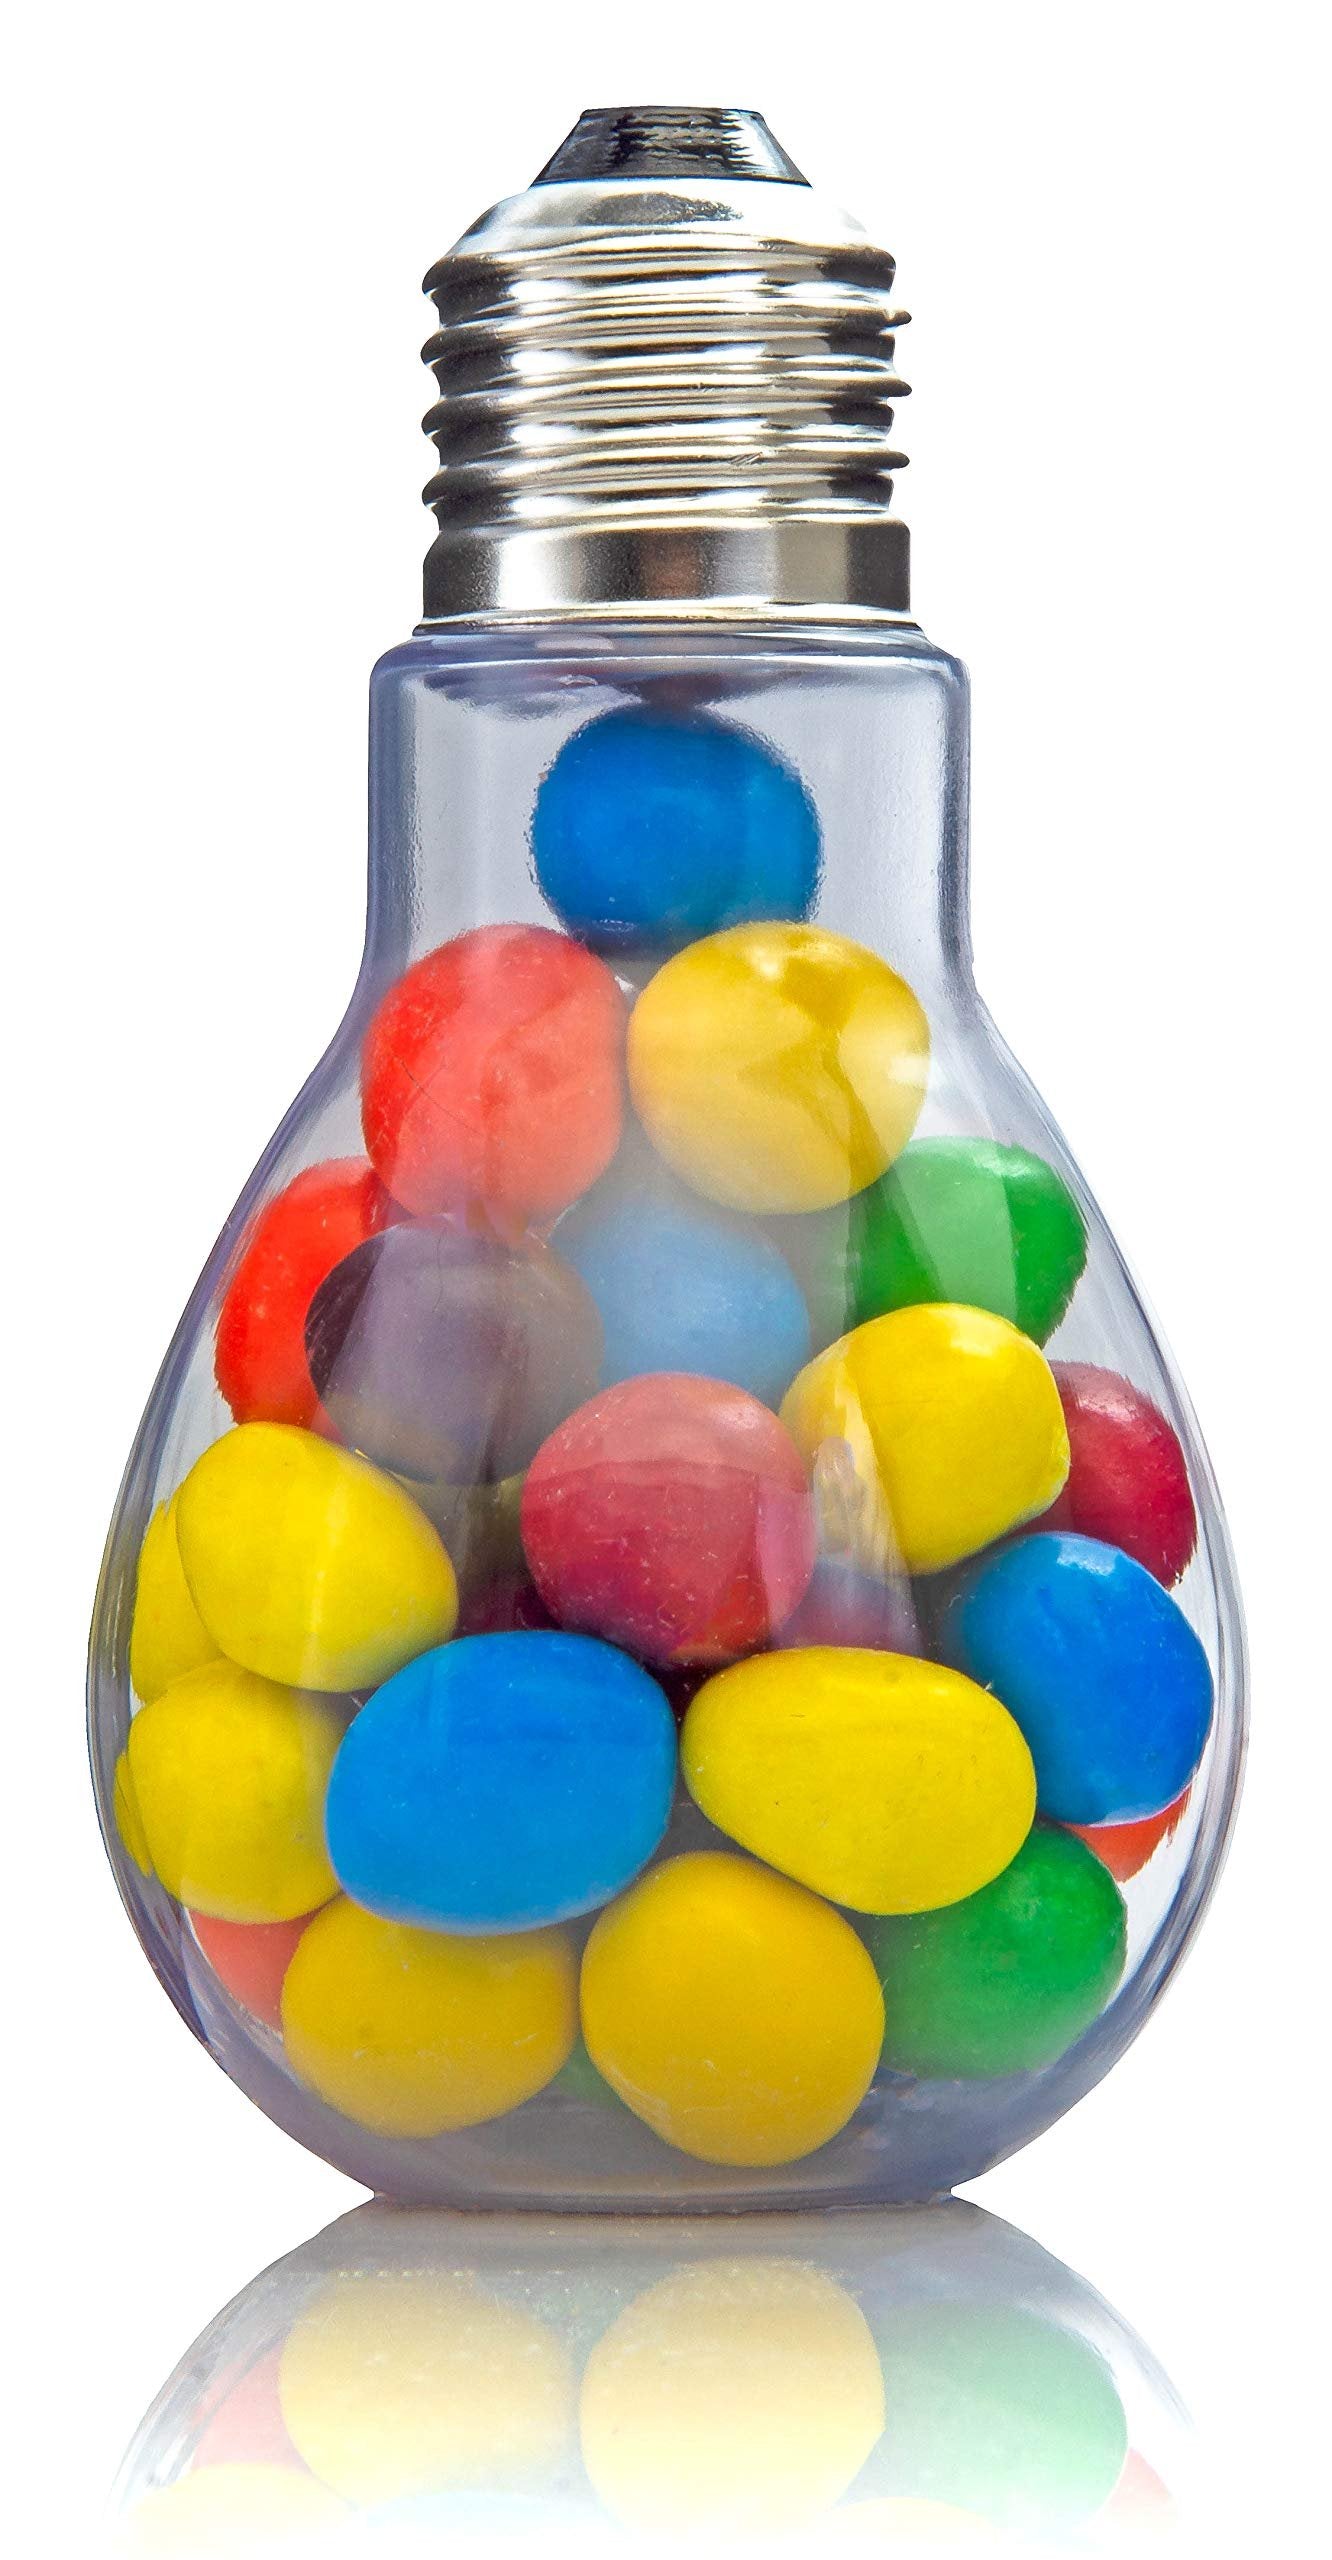 Home Collectives Fillable Light Bulb Containers, 12 Pack - Clear Plastic Candy Jars, Party Favors, Decorative Centerpieces, Arts and Crafts Supplies - Twist Off Cap, Freestanding Bottom, 4” Tall